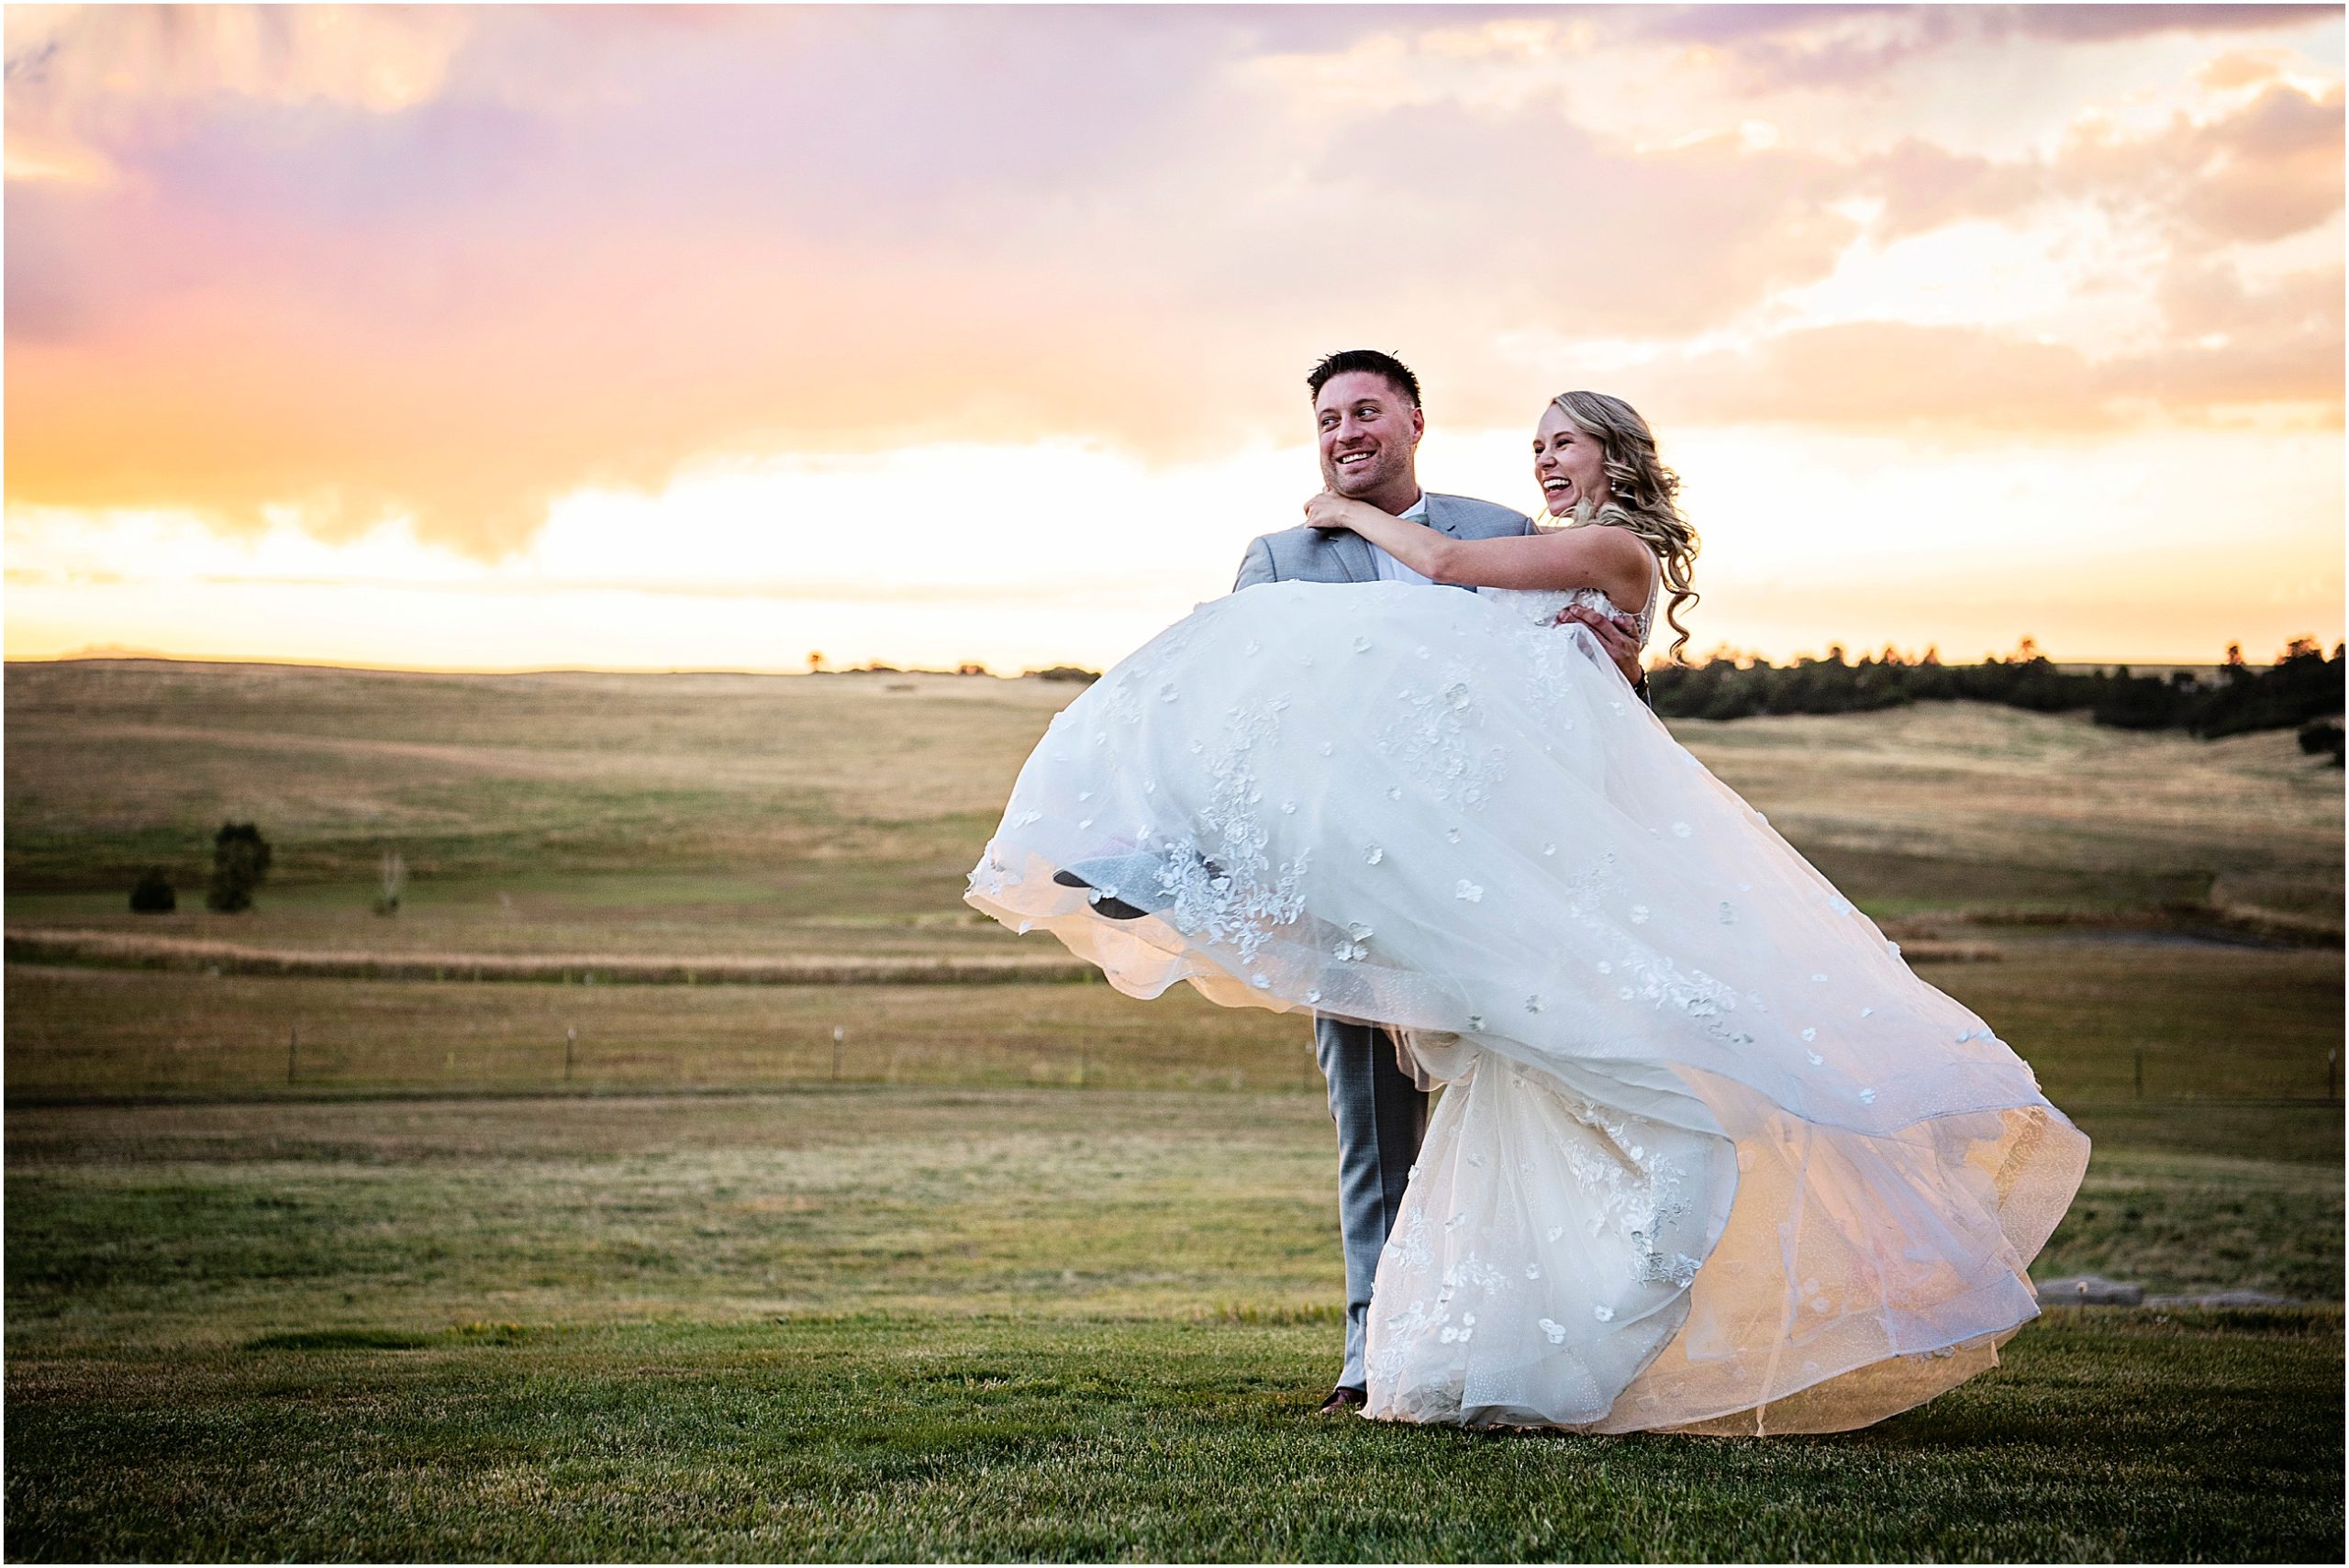 Groom carries bride at sunset while they Bothe smile and laugh